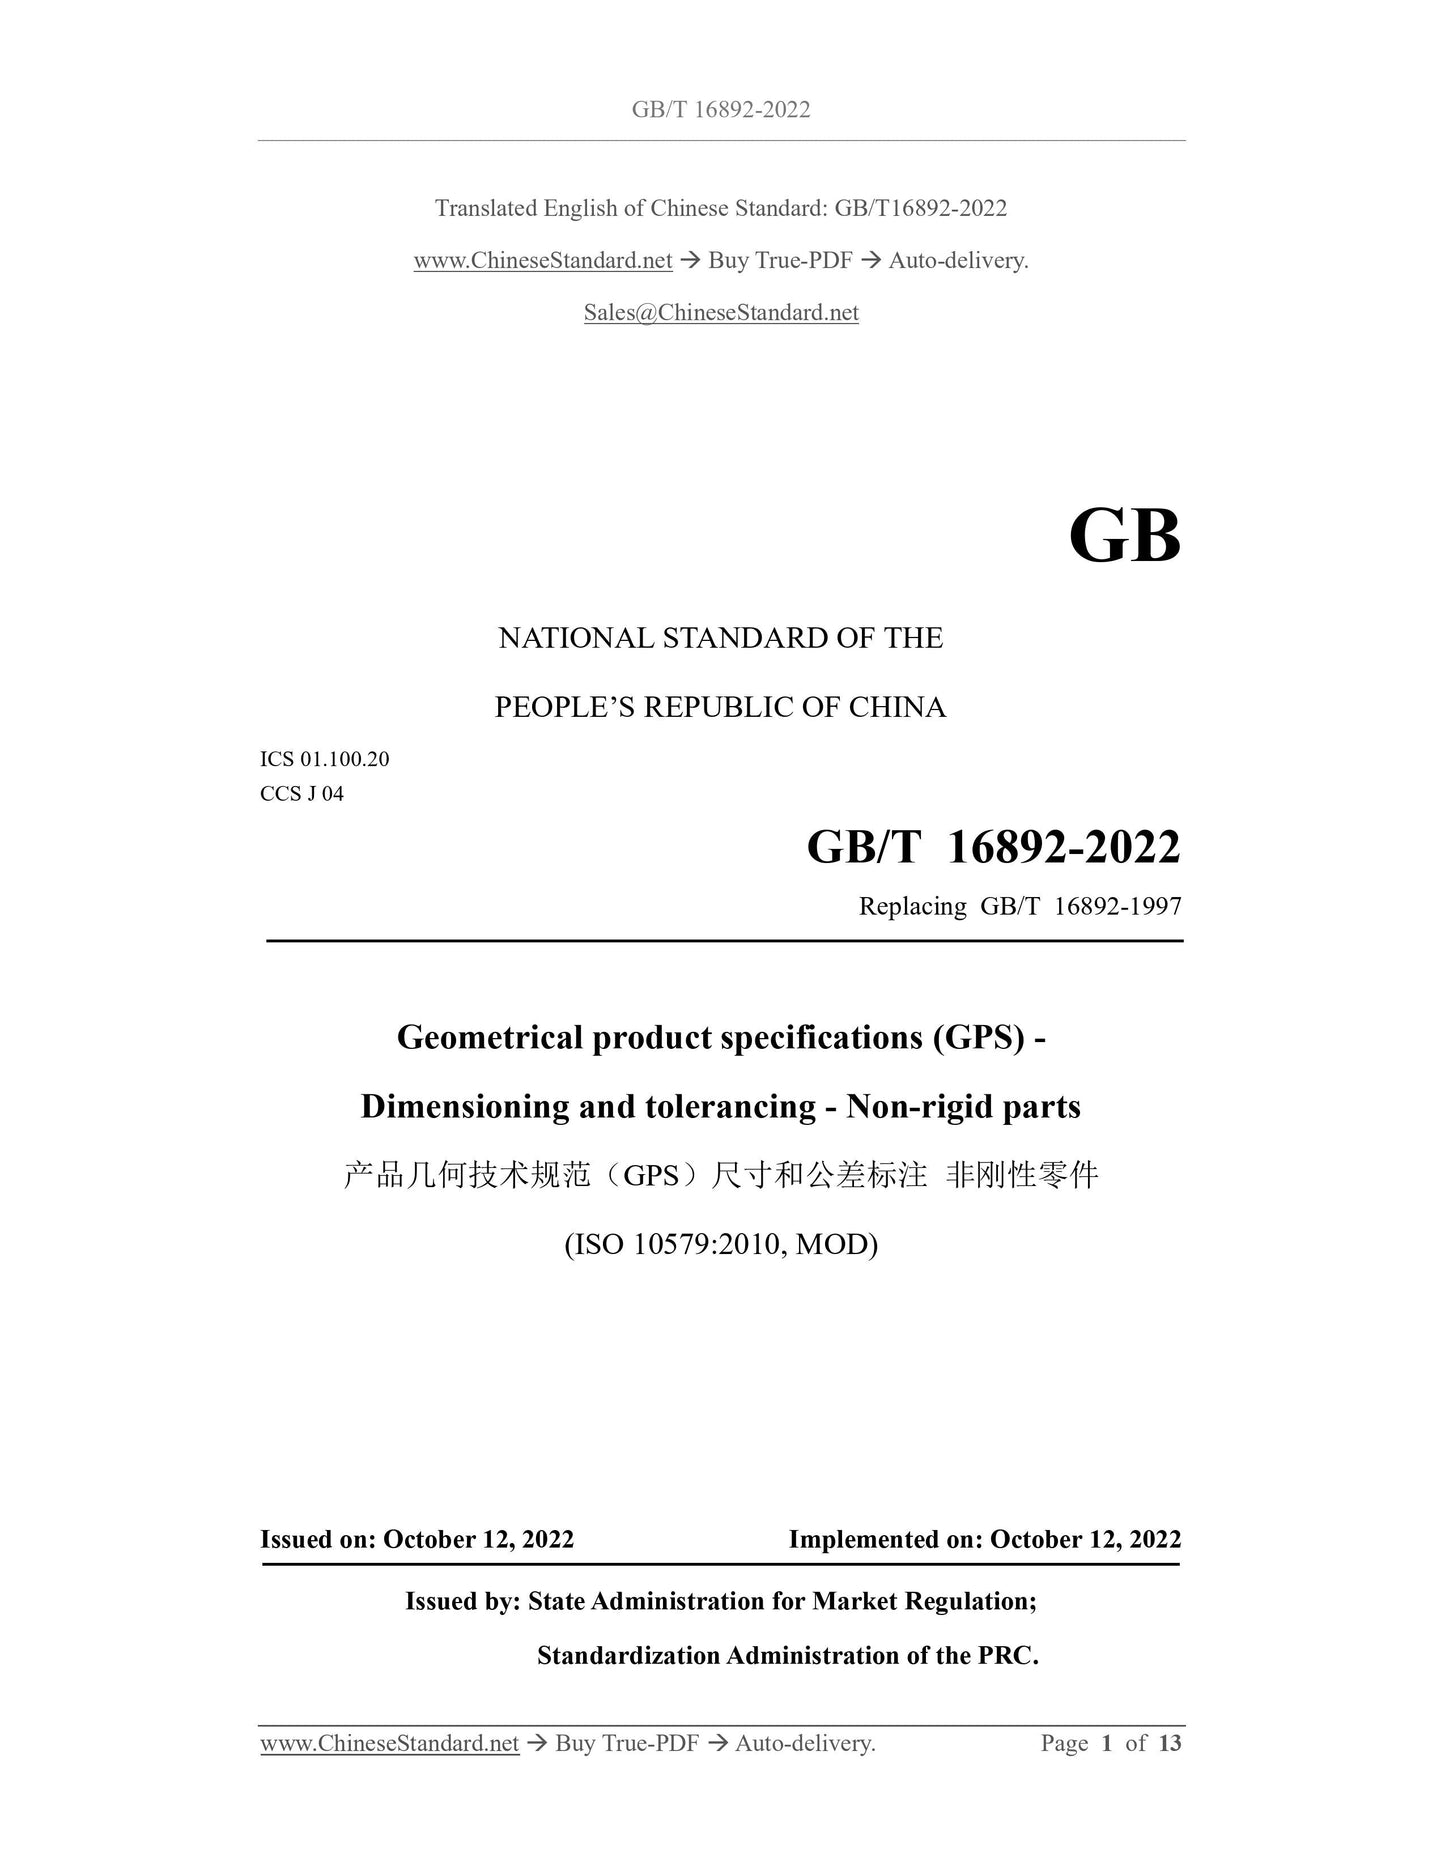 GB/T 16892-2022 Page 1